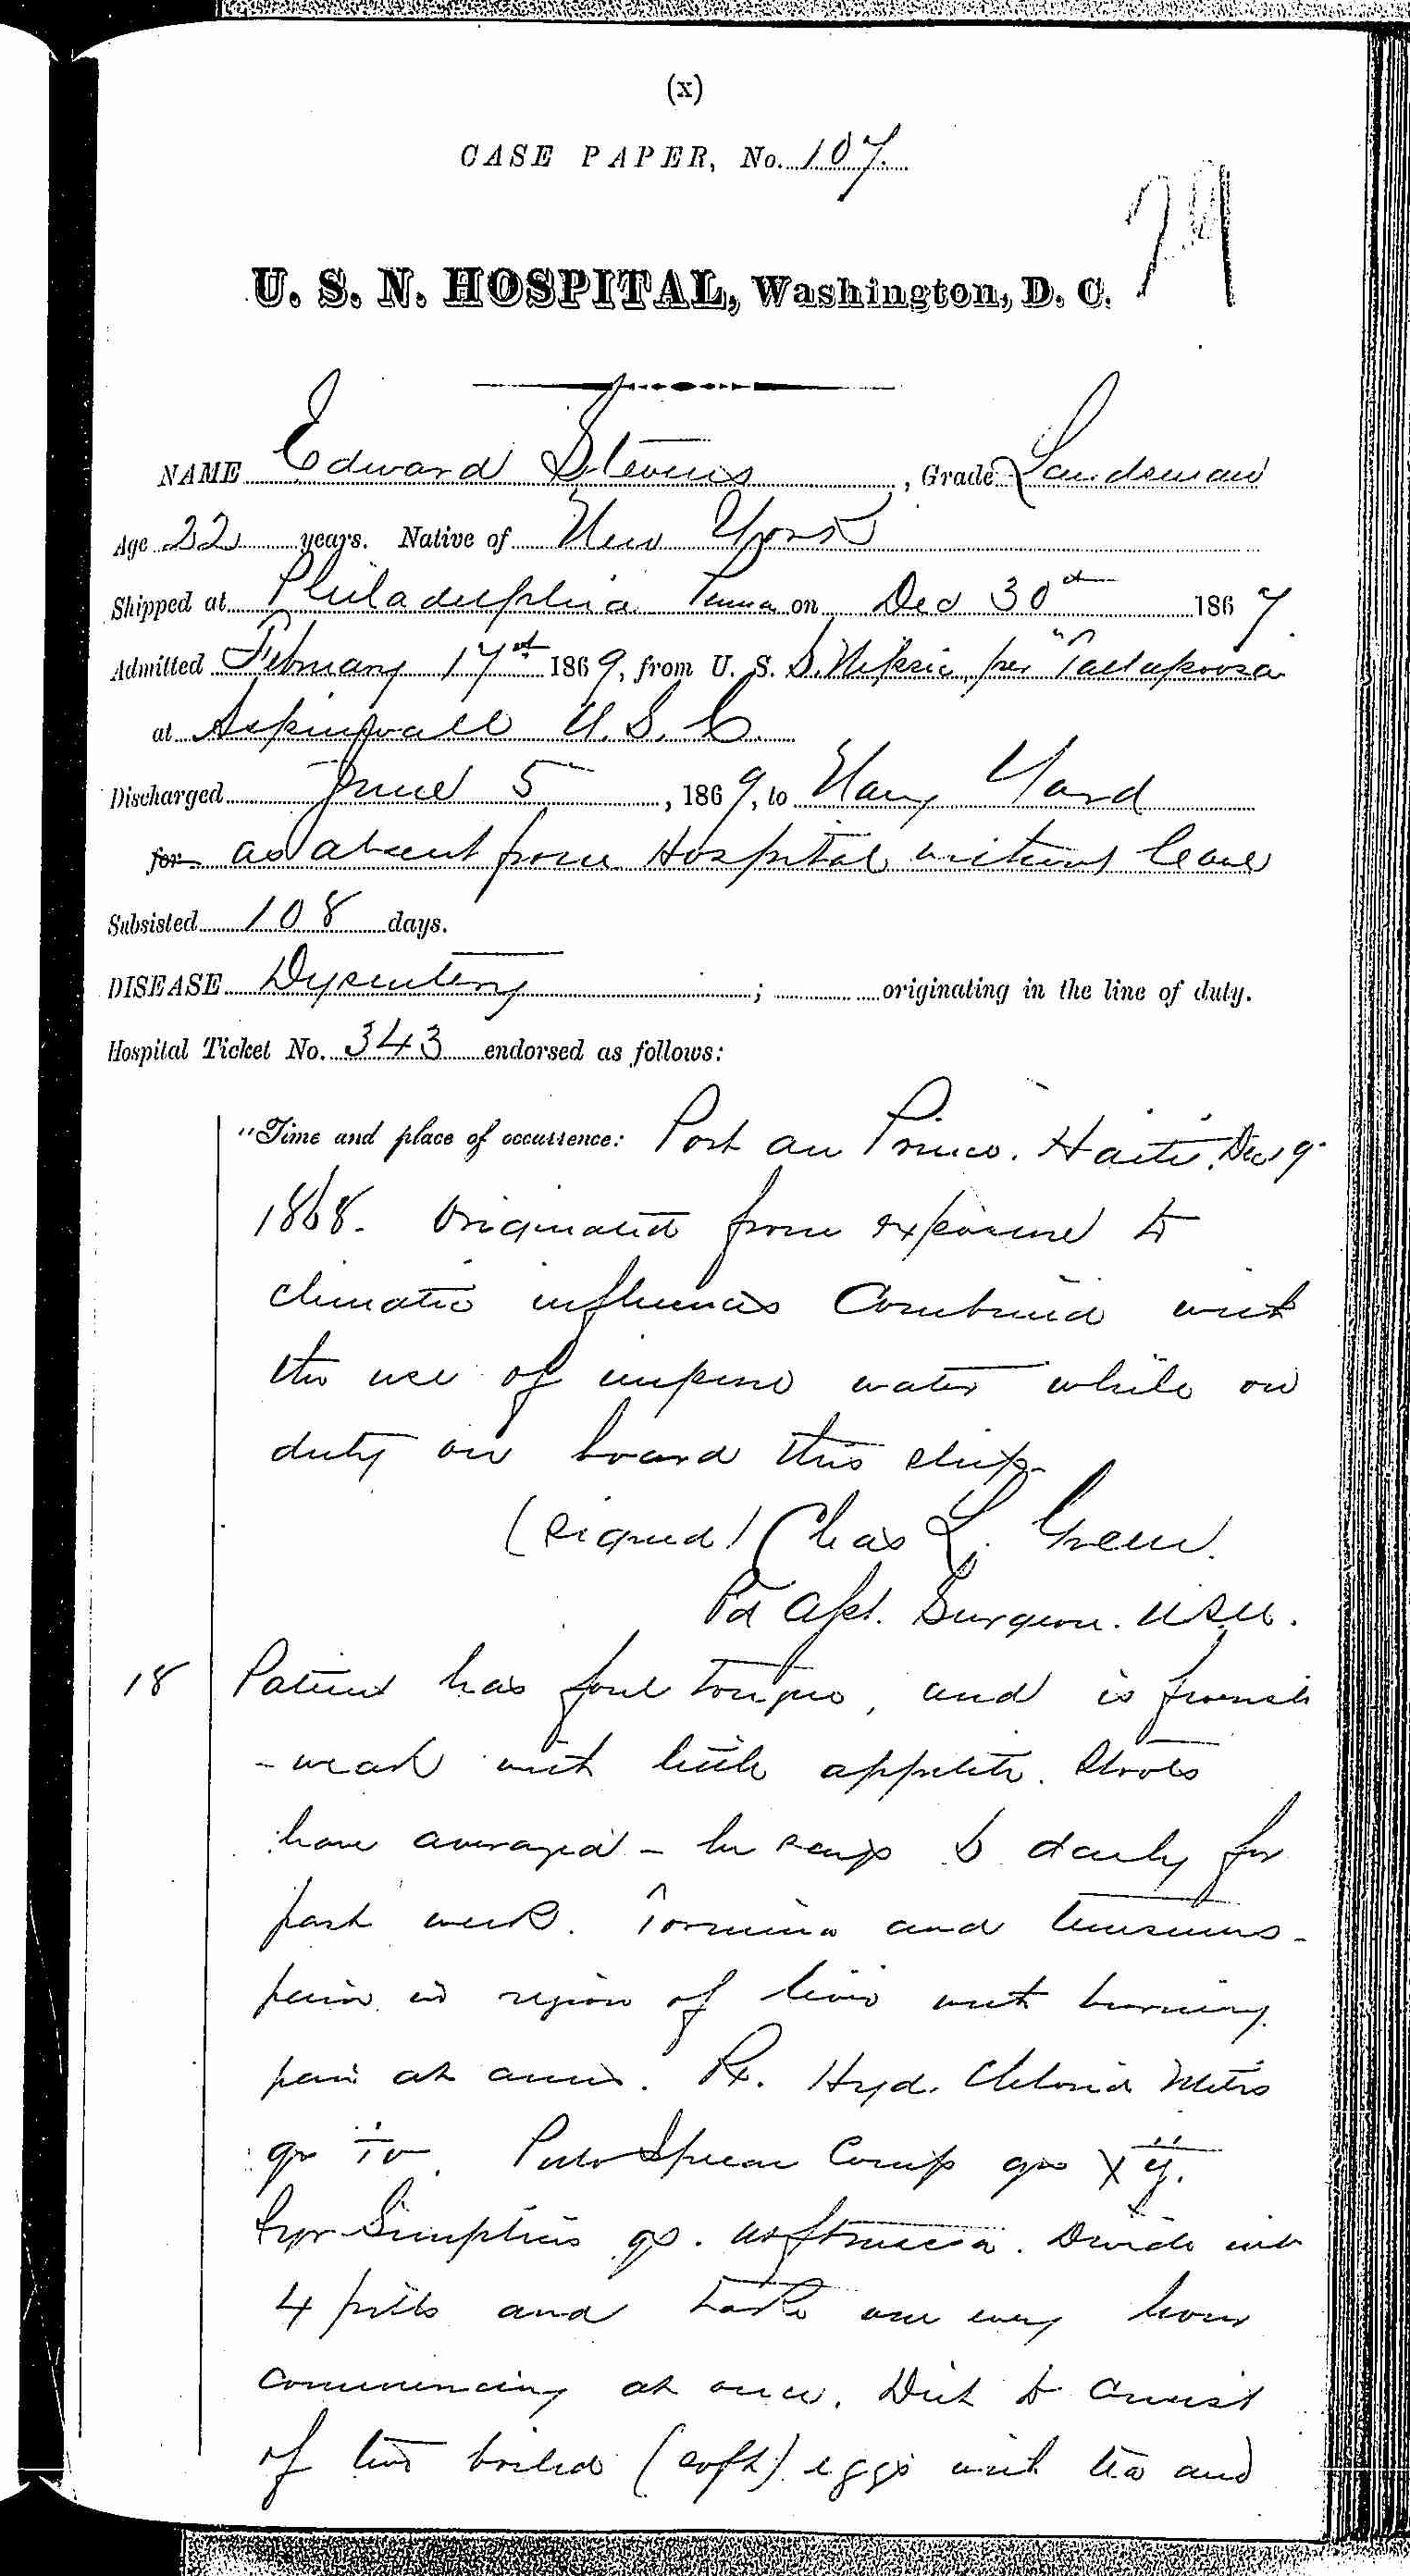 Entry for Edward Stevens (page 1 of 5) in the log Hospital Tickets and Case Papers - Naval Hospital - Washington, D.C. - 1868-69